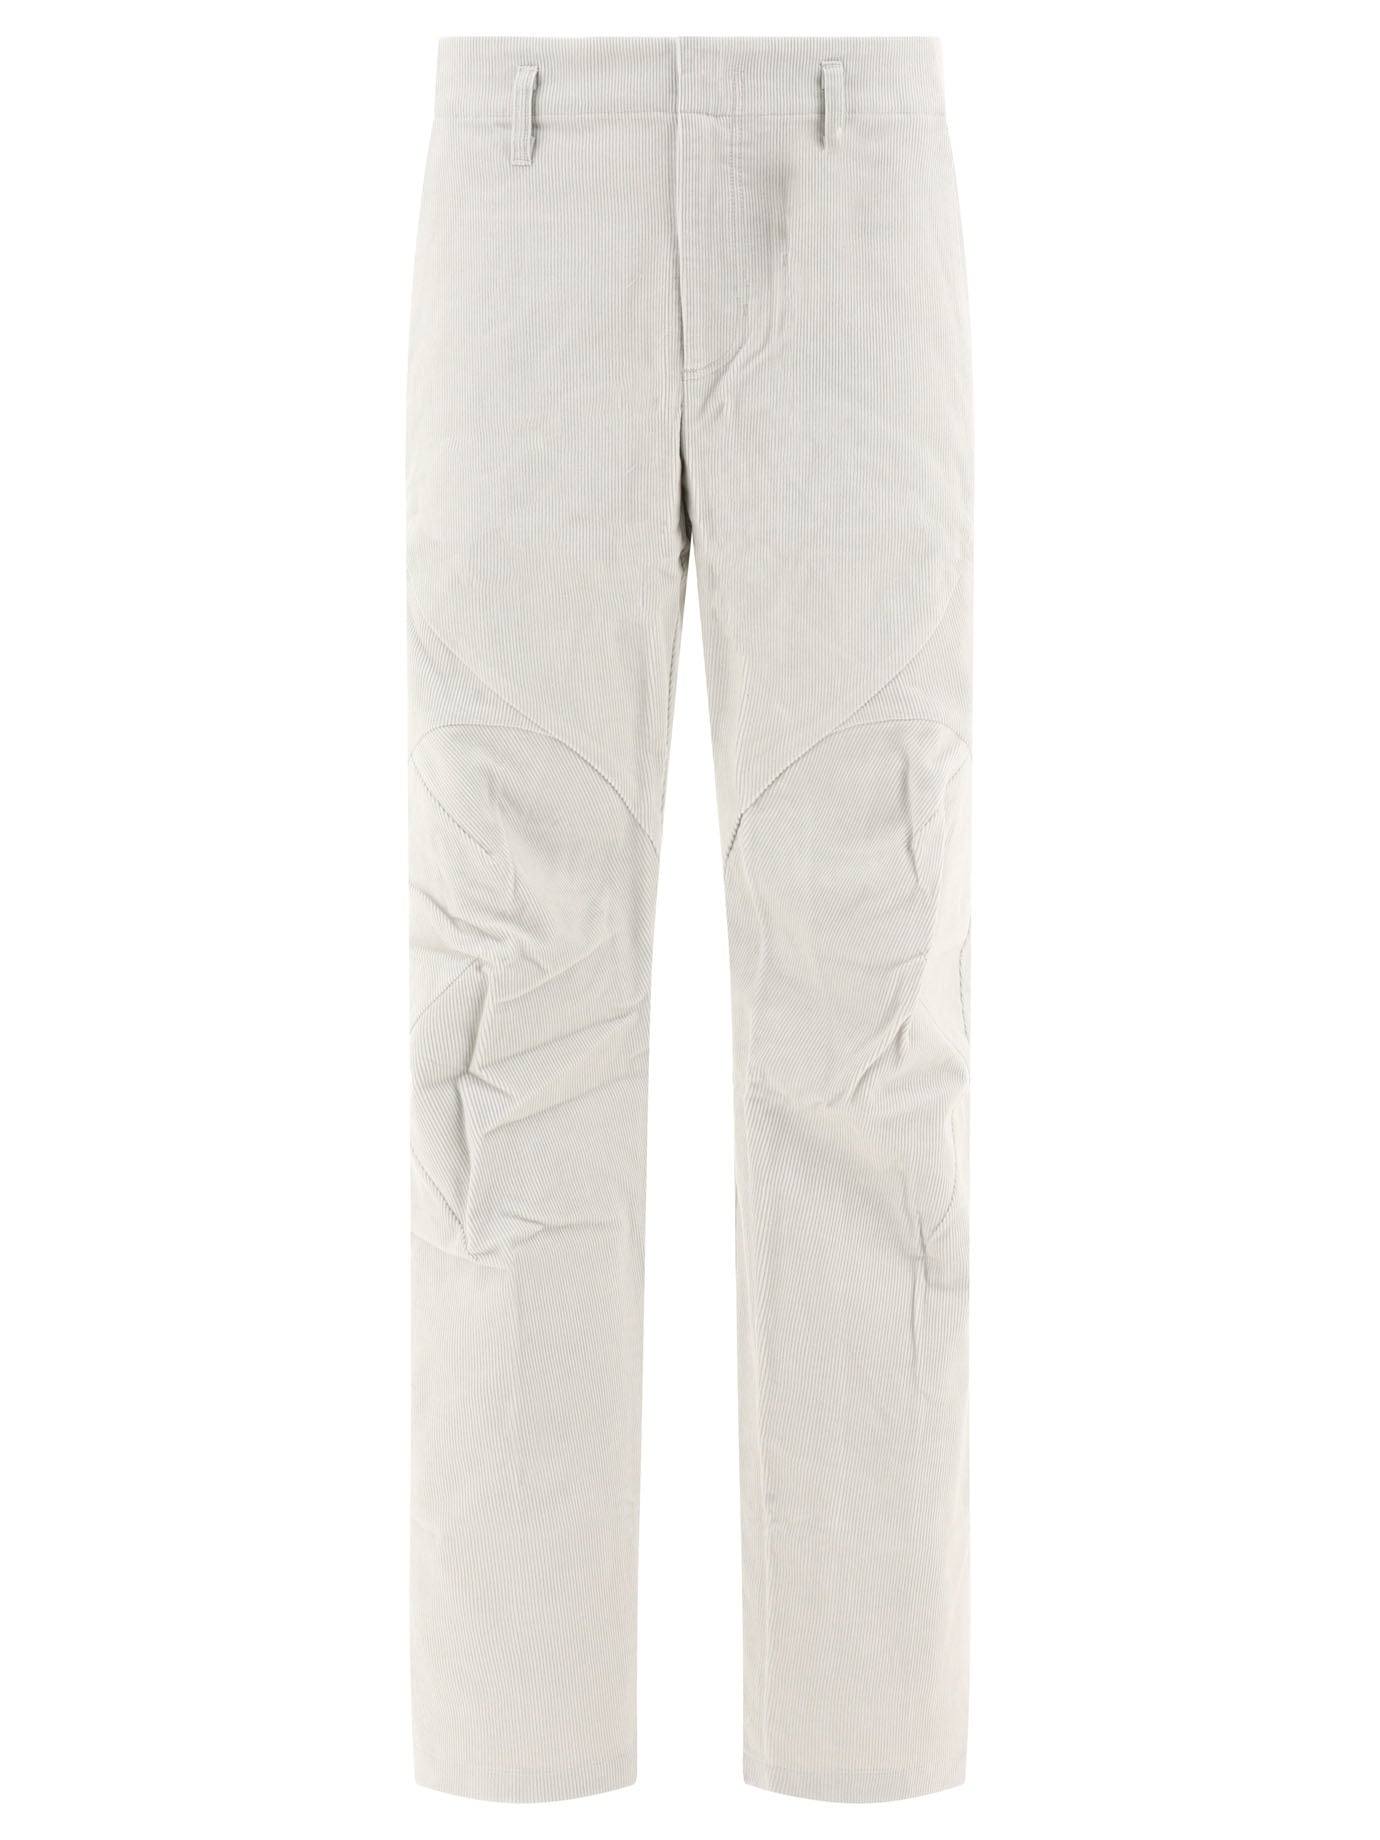 Post Archive Faction (paf) 5.1 Right Trousers Grey